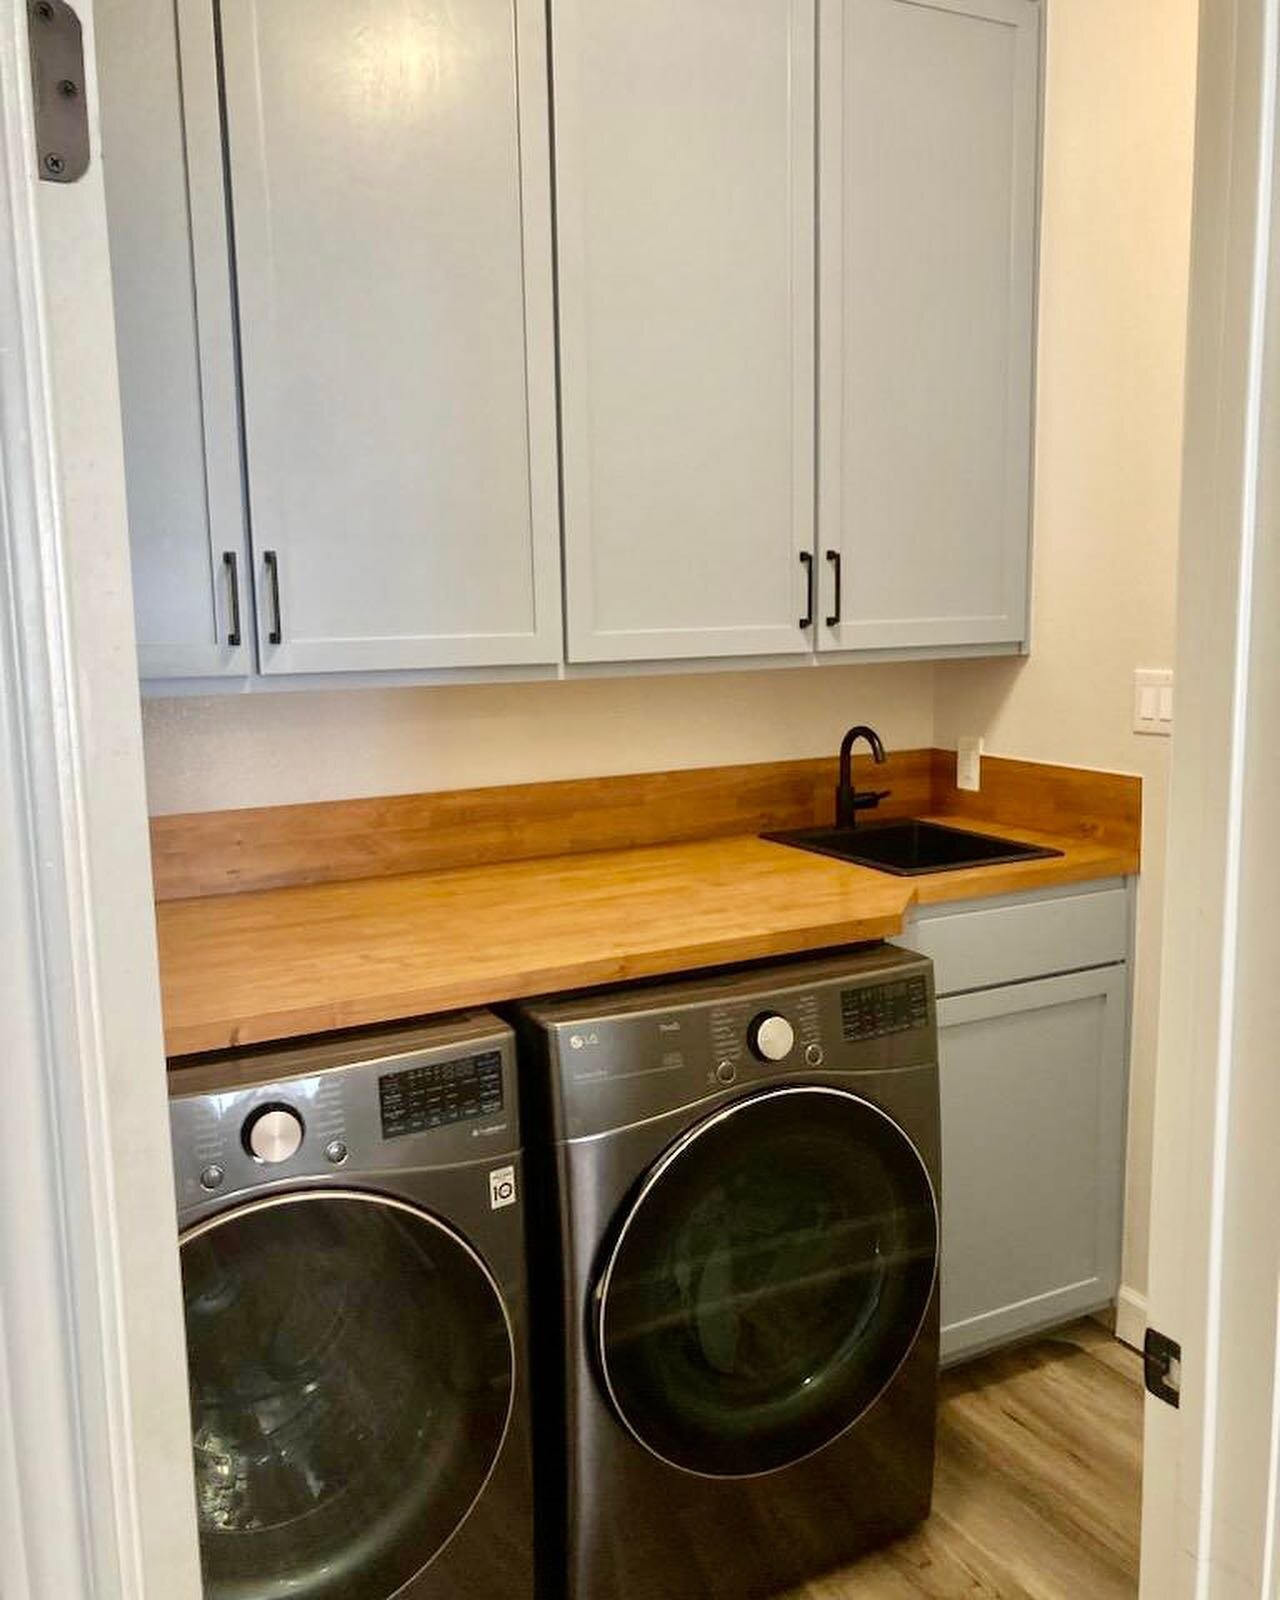 Sneak peek of our latest laundry room remodel; in particular, a fold out step so their kids can use the faucet. Believe it or not, this beautiful mahogany step was built from shop scrap!

#upcyclefurniture #upcycle #customcabinetry #mahogany #mahogan